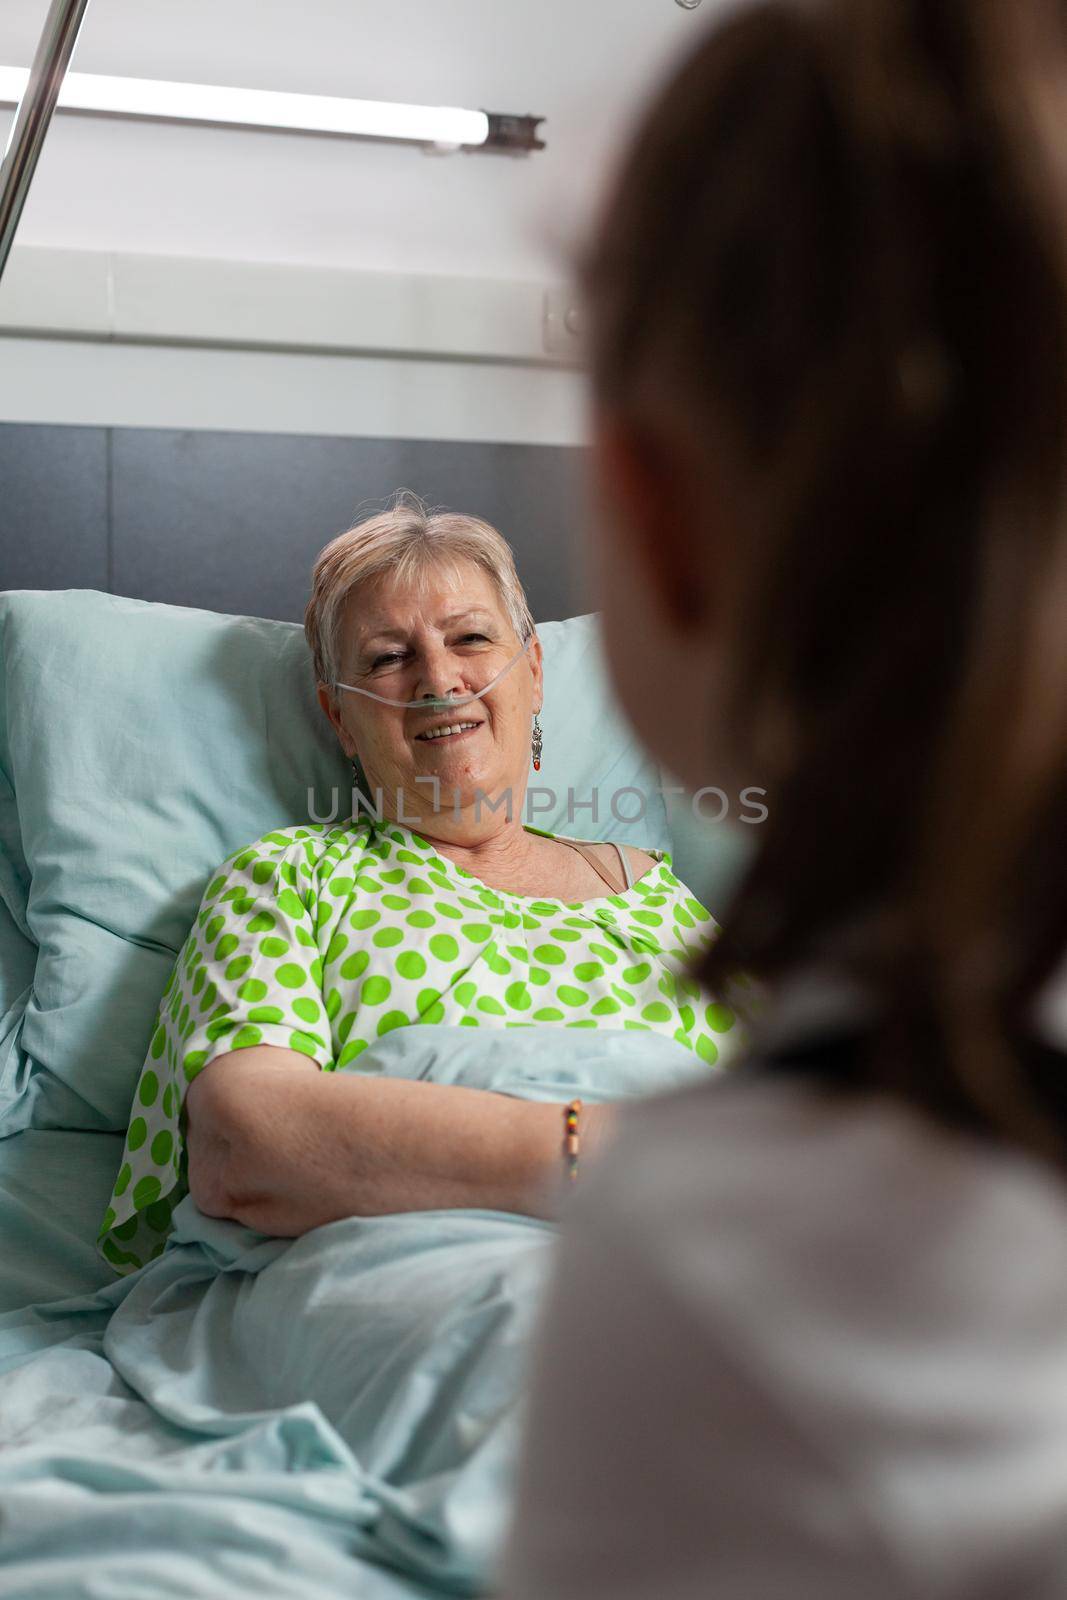 Sick retired grandmother talking with grandchild while resting in bed after medical surgery in hospital ward. Family visiting grandparent supporting during illness examination. Healthcare therapy